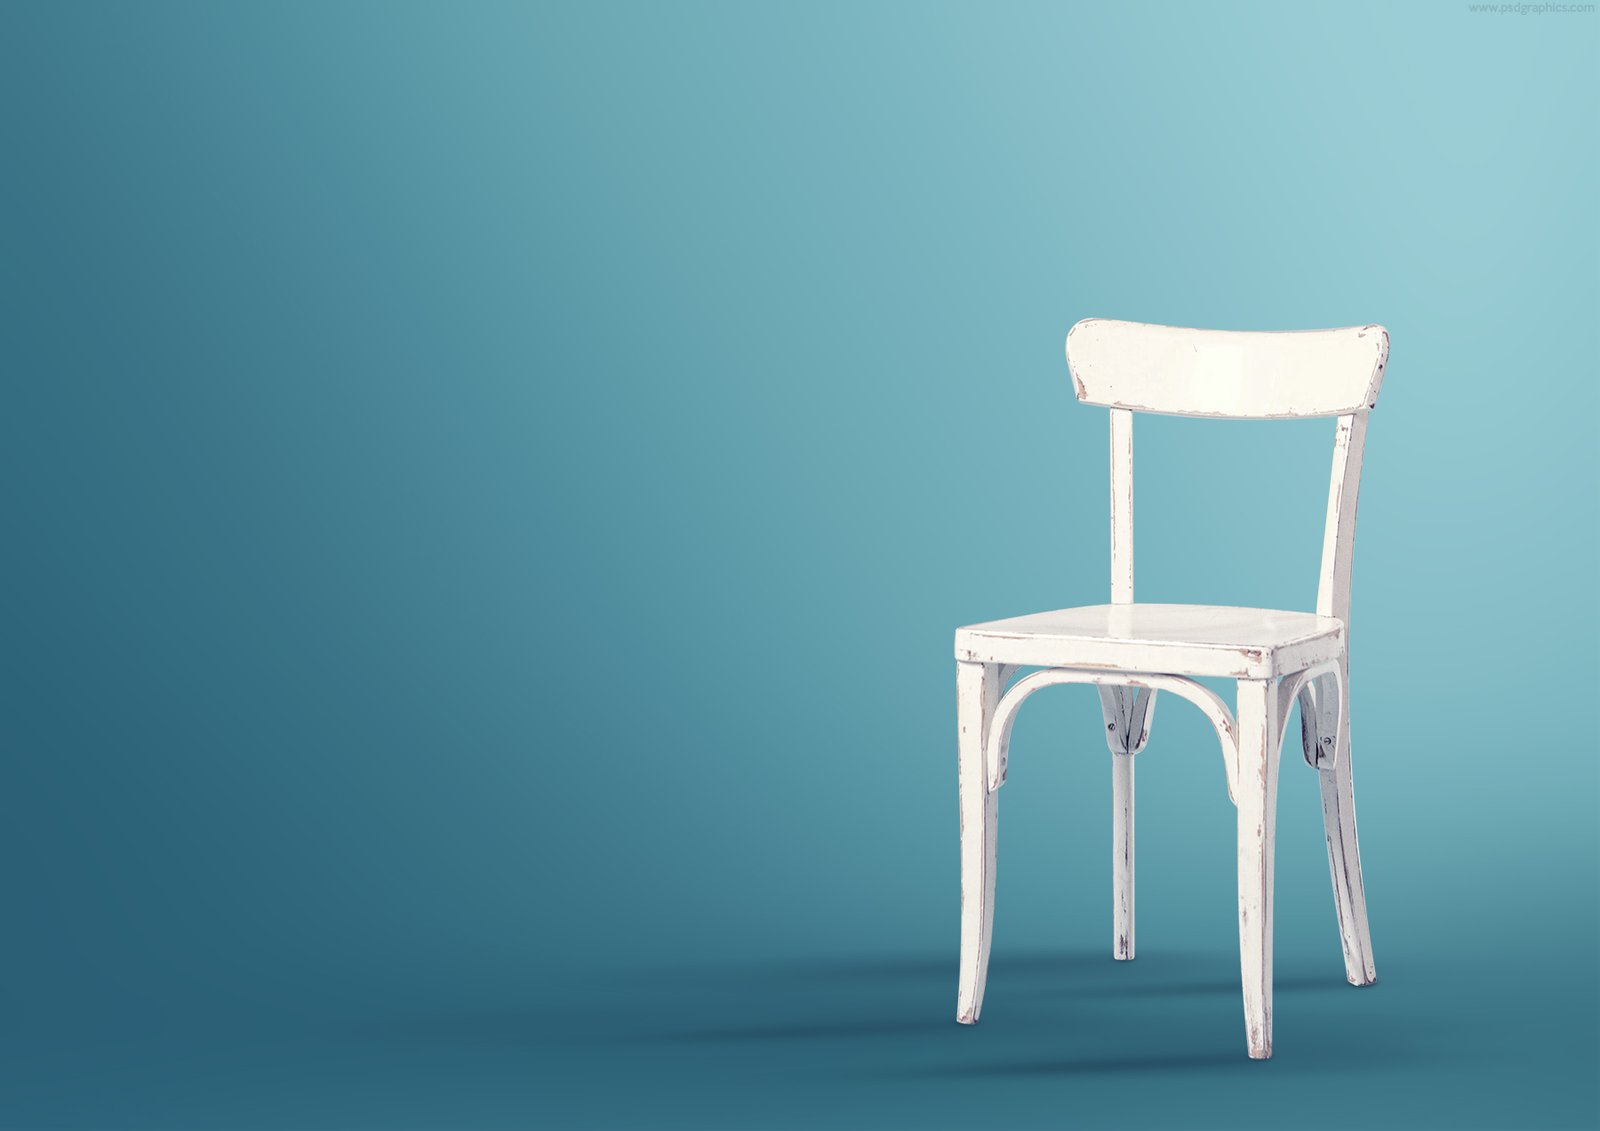 chair background photoshop download